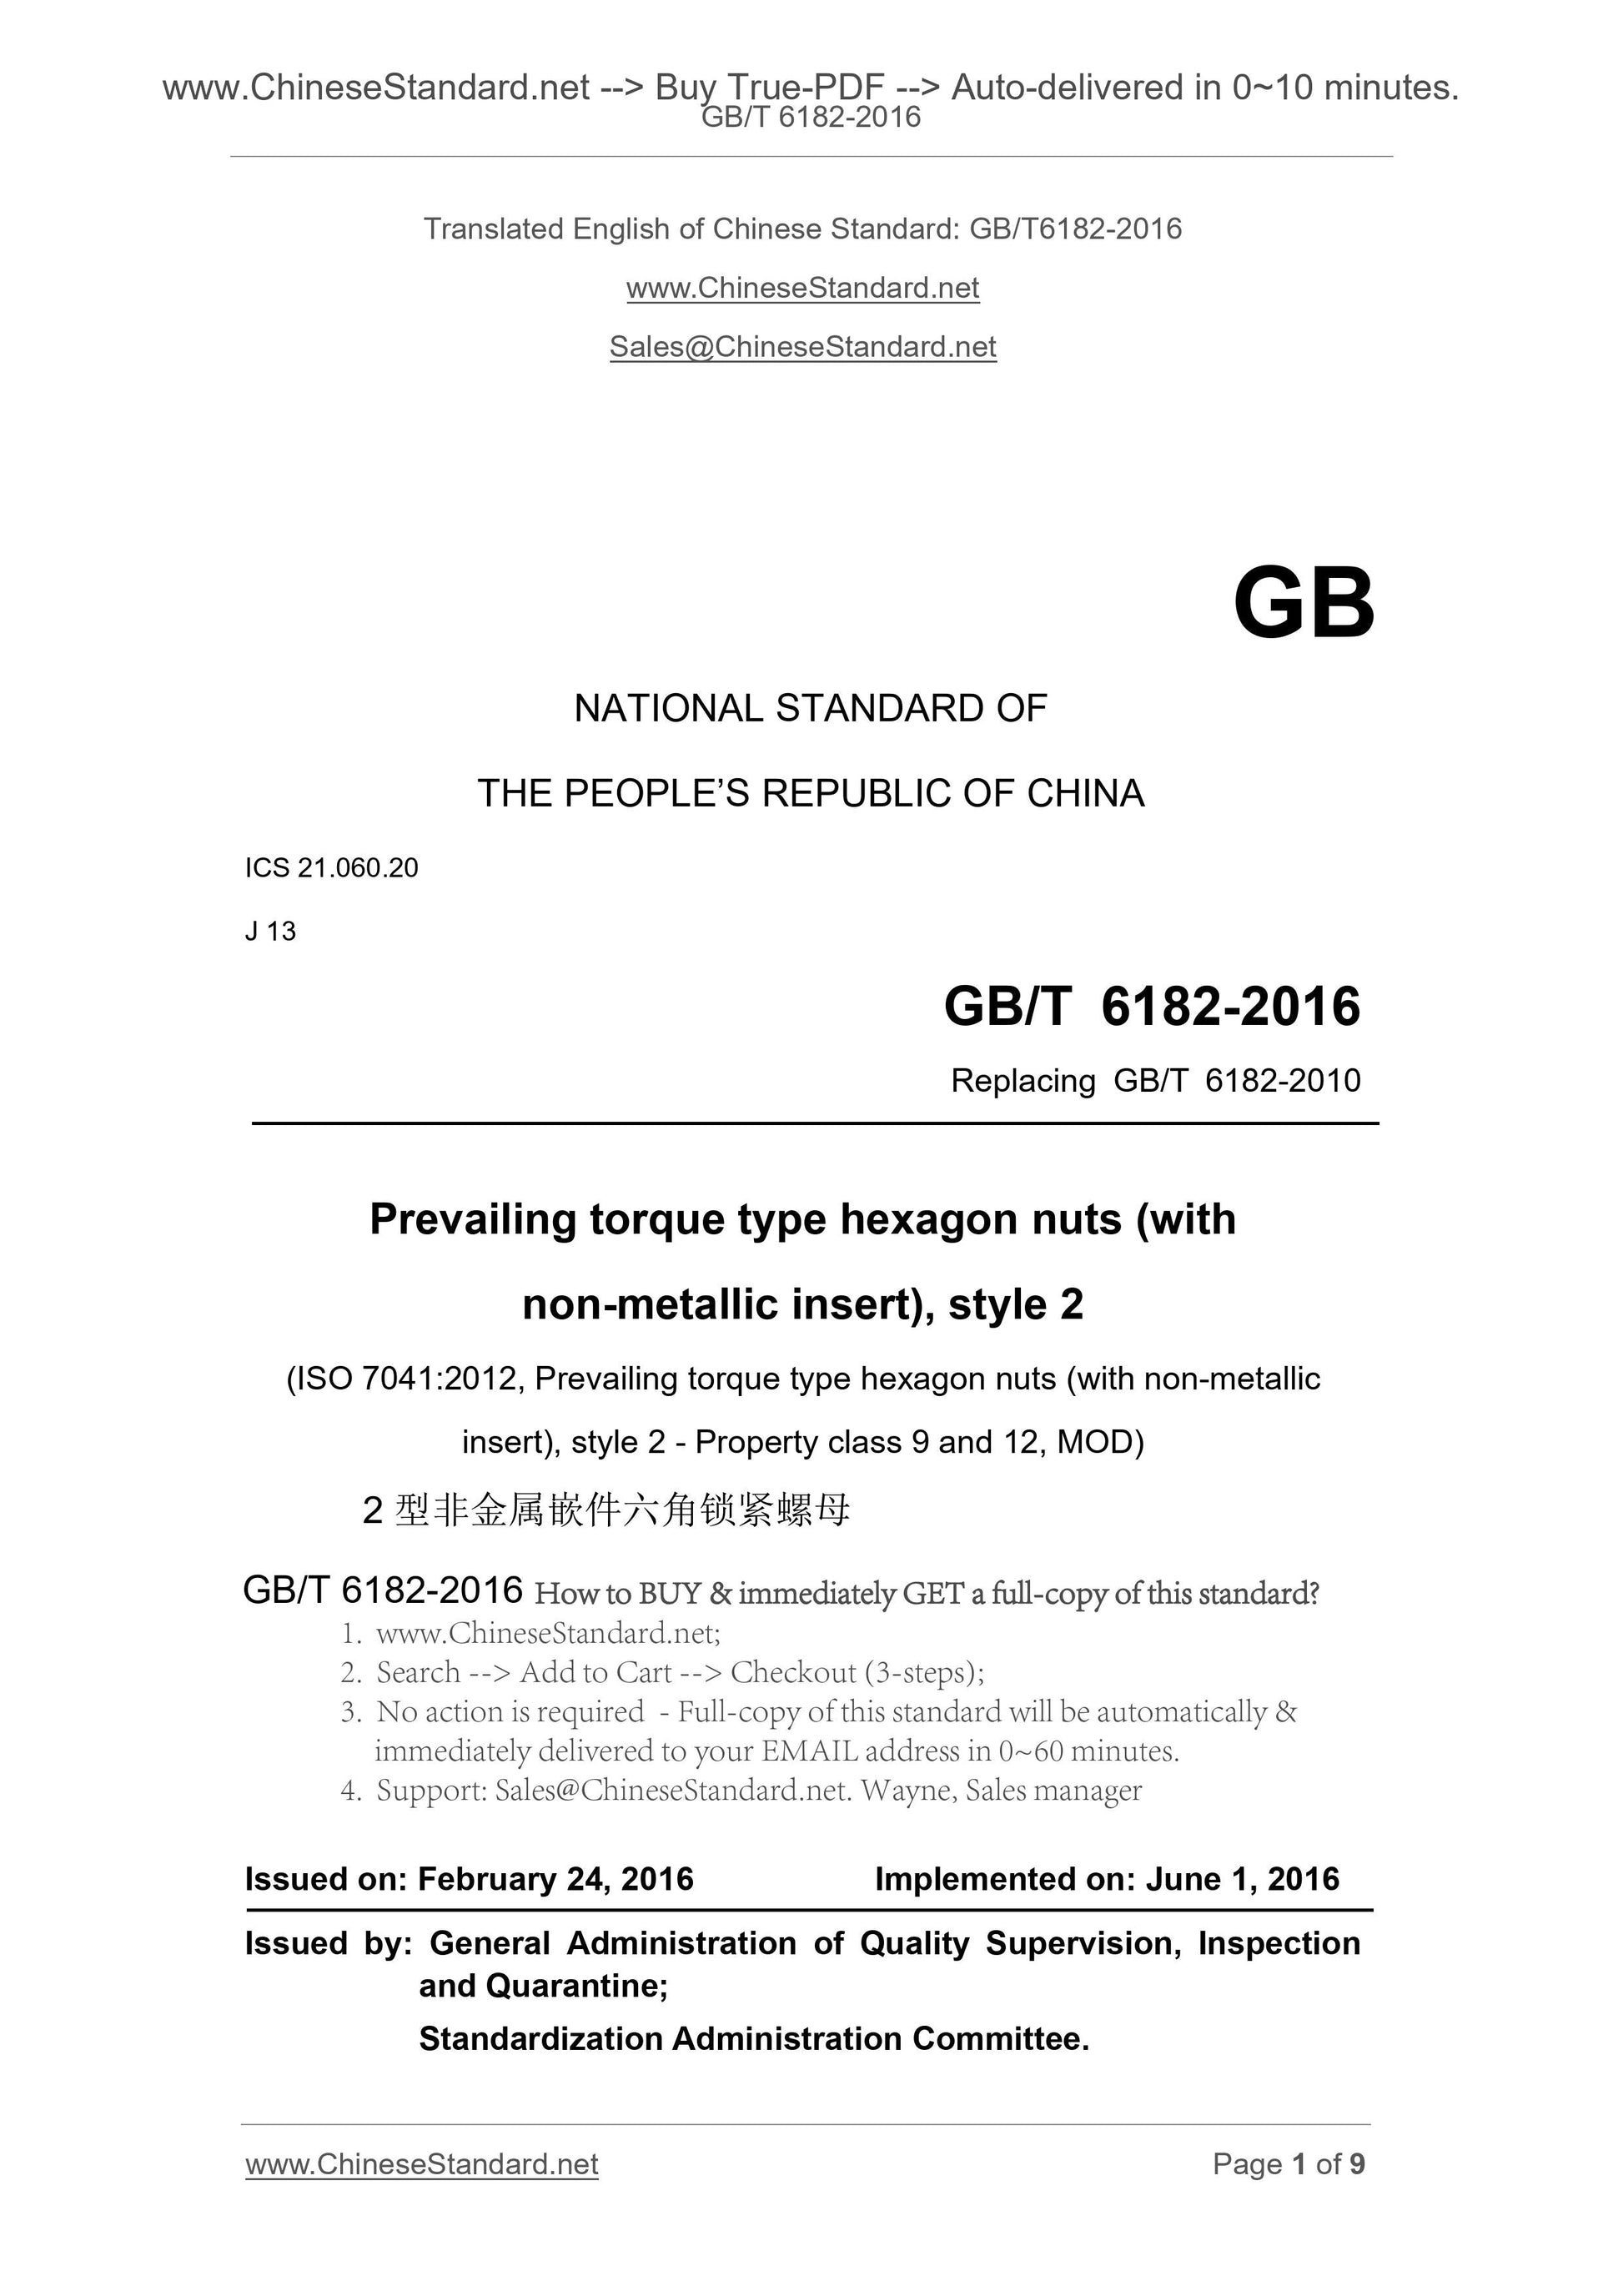 GB/T 6182-2016 Page 1